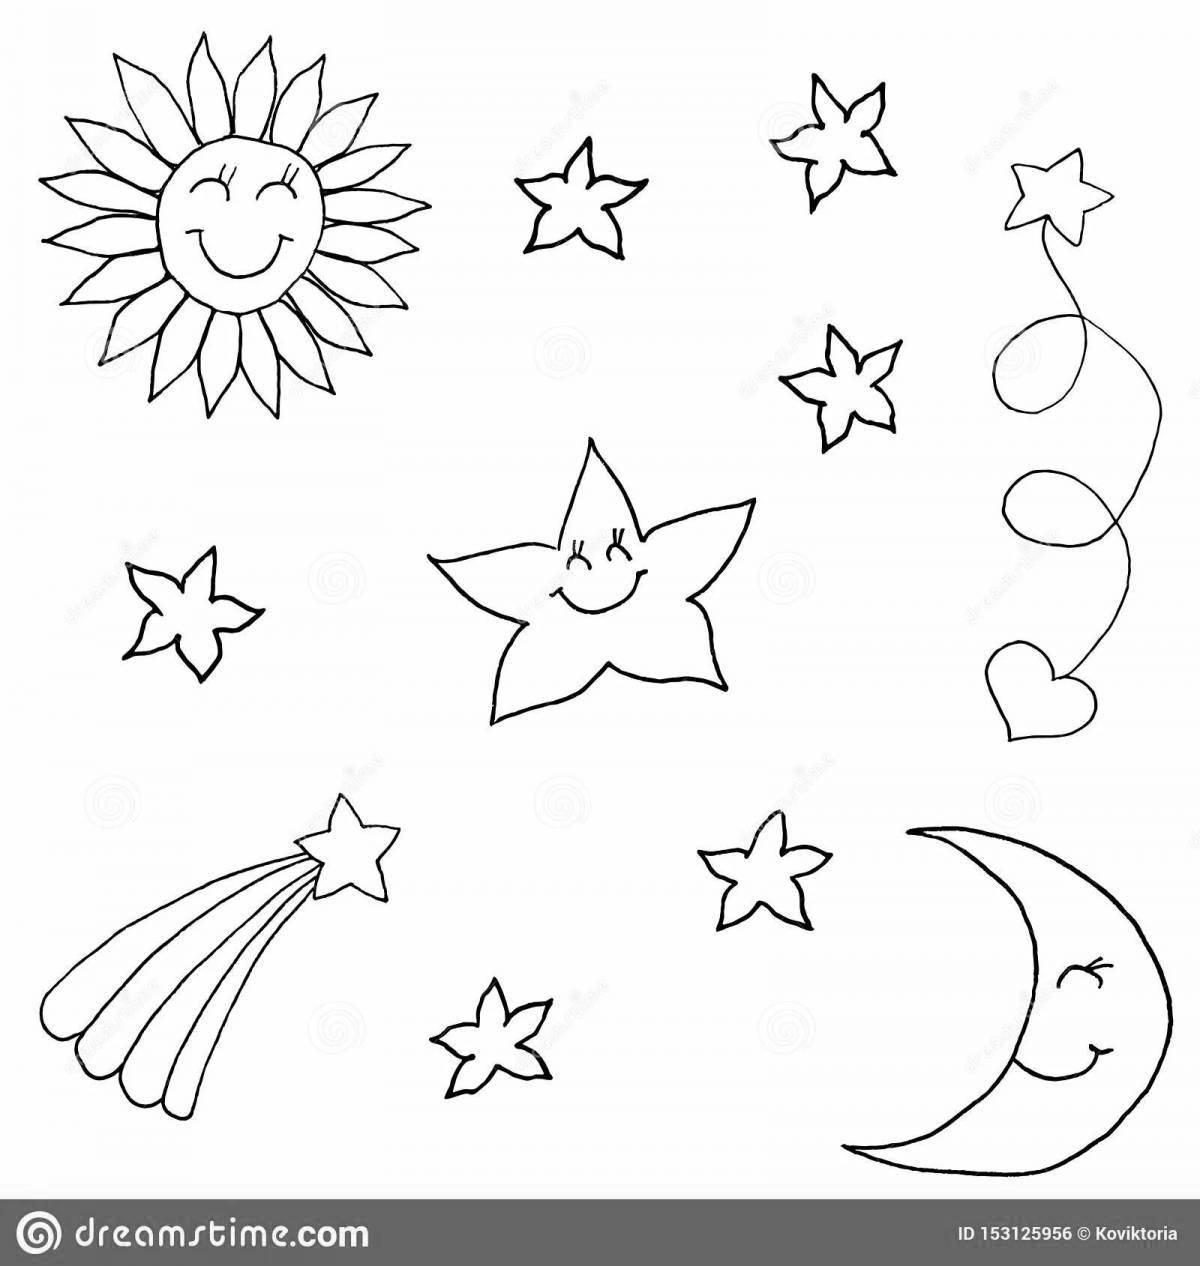 Violent coloring moon and sun for kids